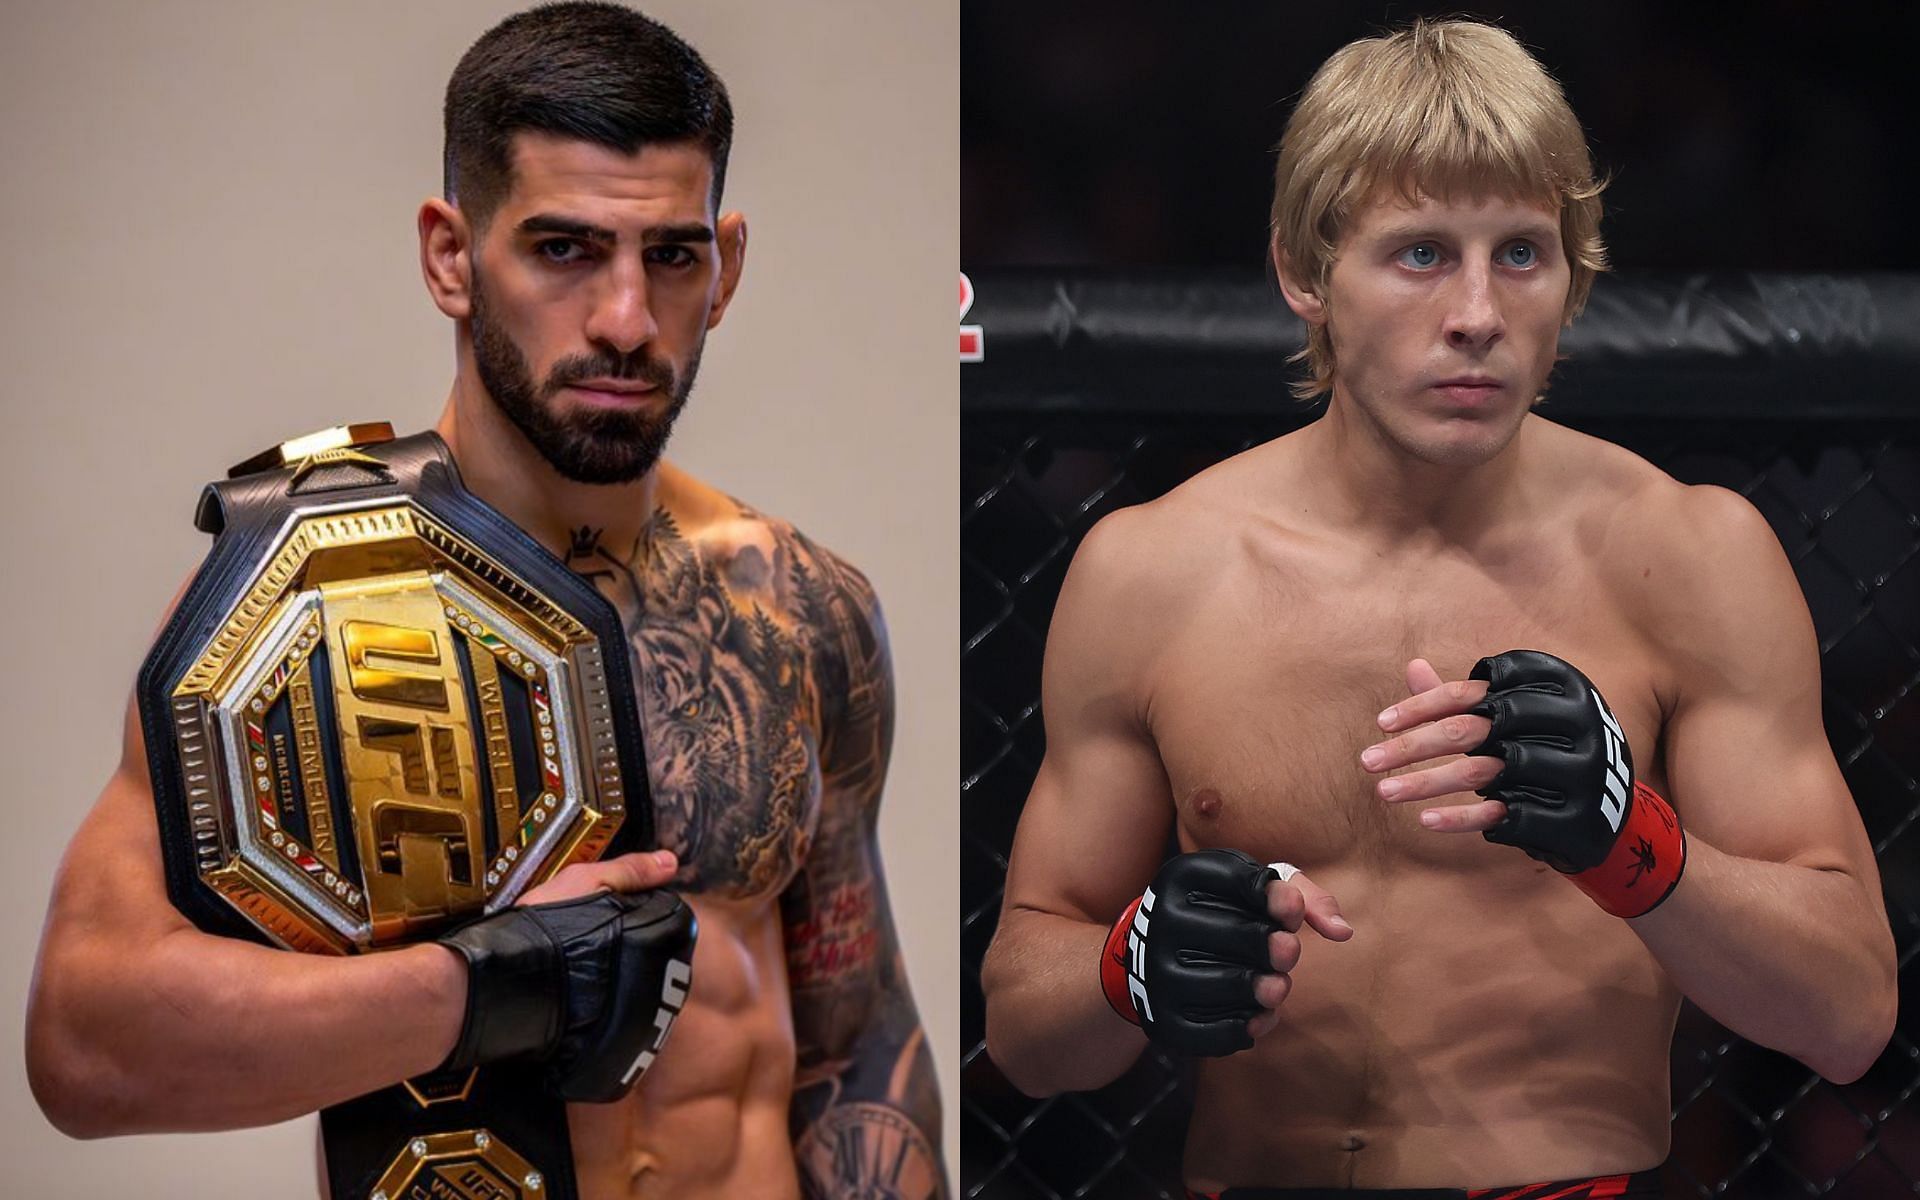 Ilia Topuria won the featherweight championship at UFC 298 (right) and Paddy Pimblett (left). [Getty Images and @iliatopuria on Instagram]